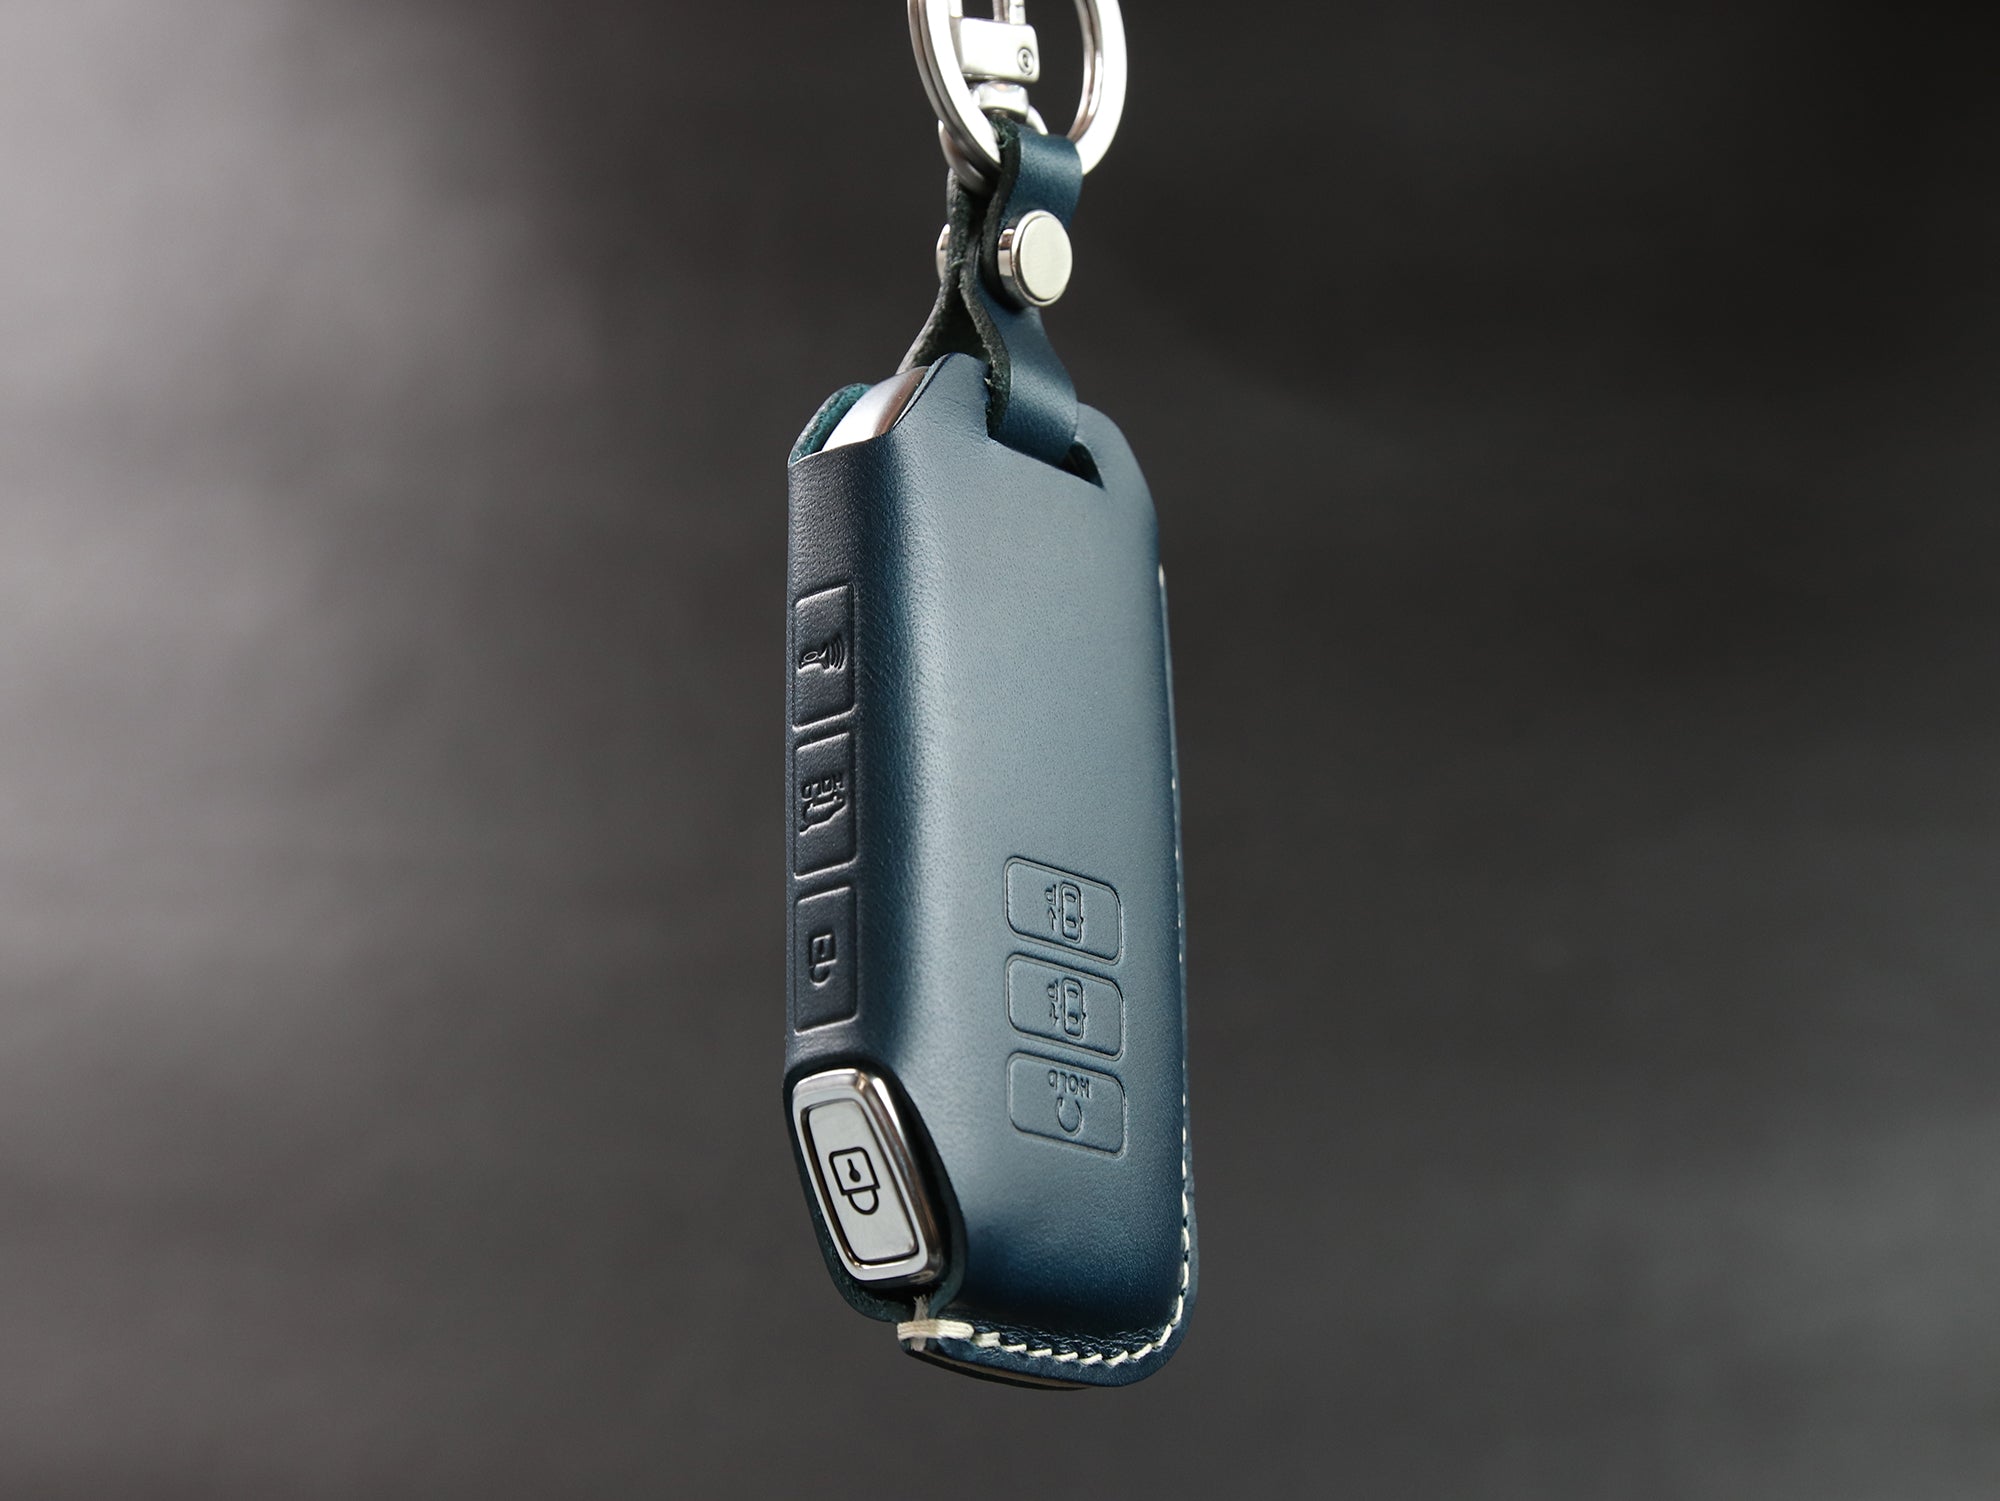 KIA [3] Key Fob Cover - EV6 Sportage - Handcrafted in USA - Italian  Veg-Tanned Leather